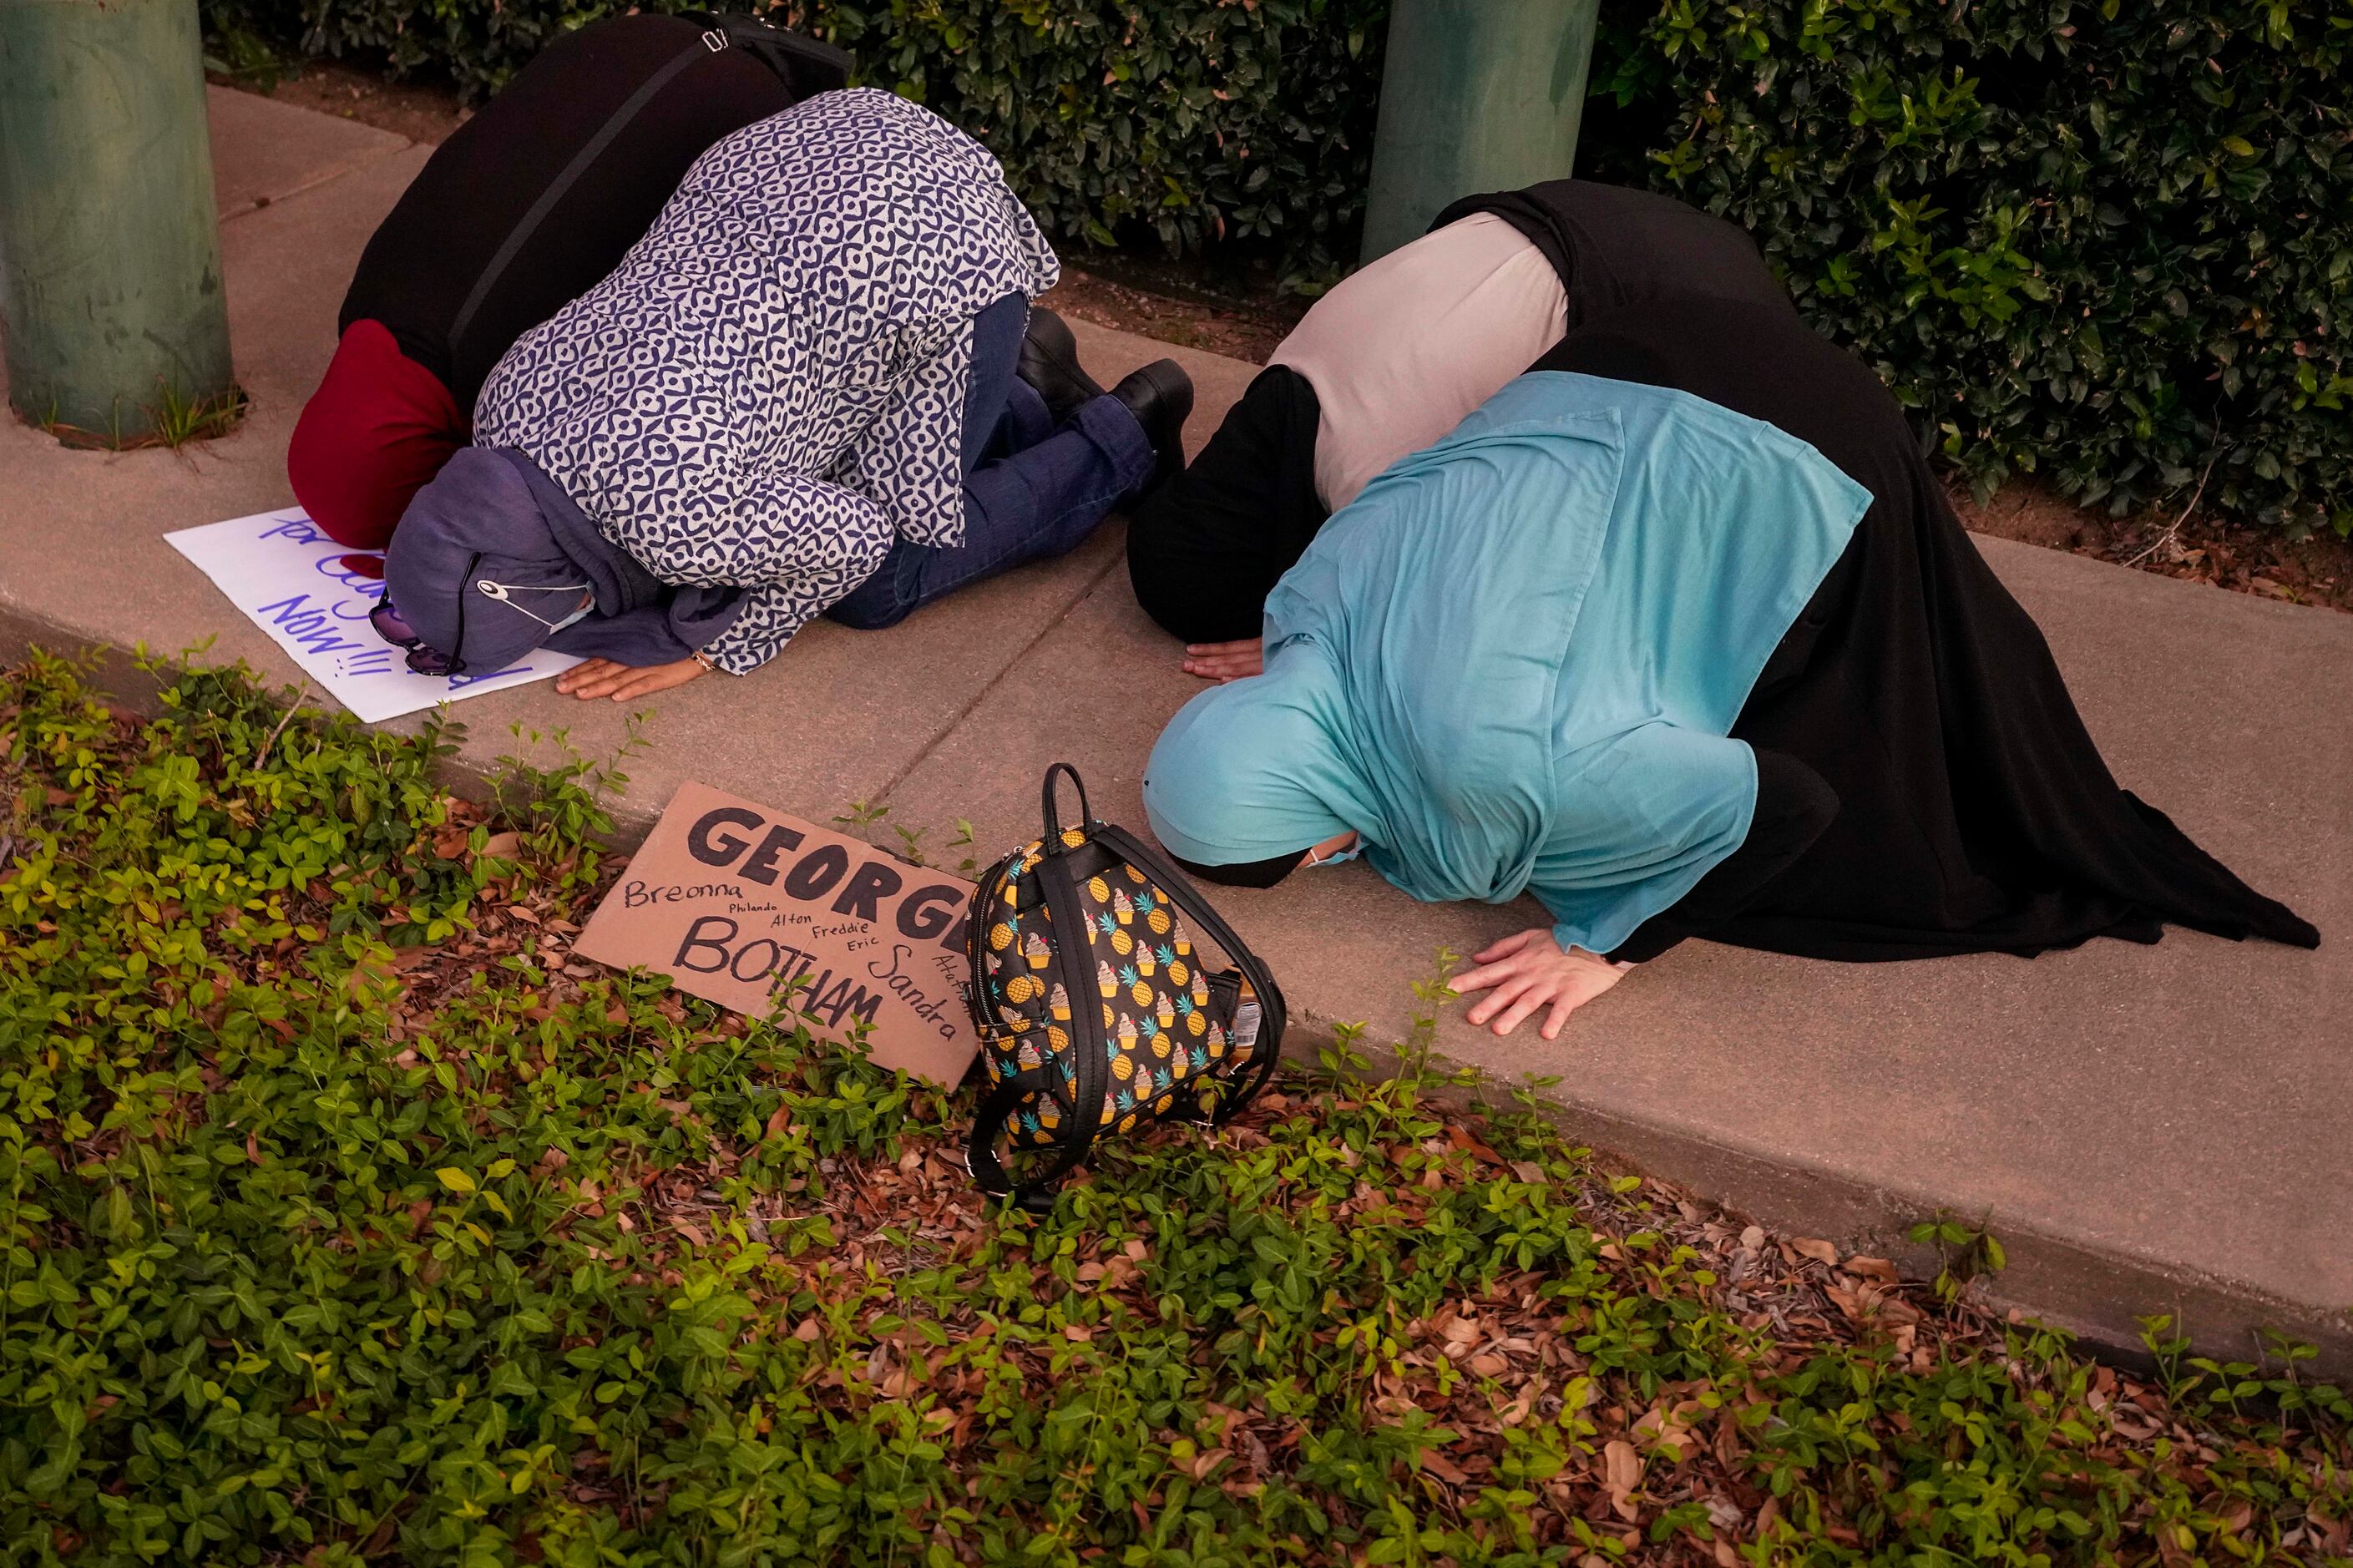 A group of muslim women steps aside from the crowd and puts down their protest signs to...